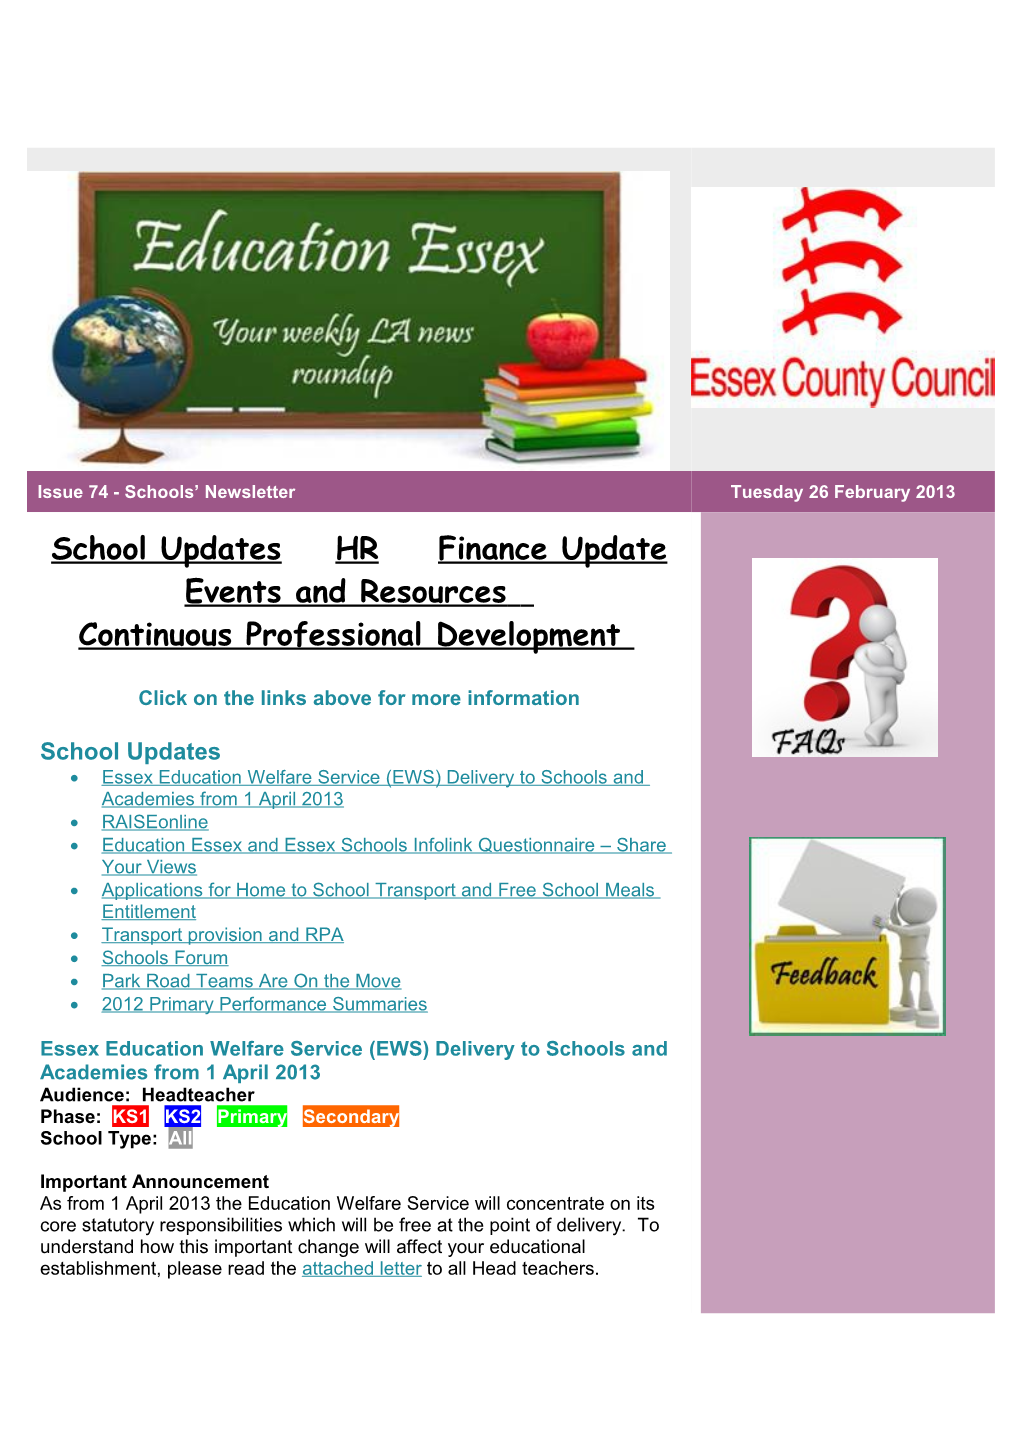 Education Essex and Essex Schools Infolink Questionnaire Share Your Views